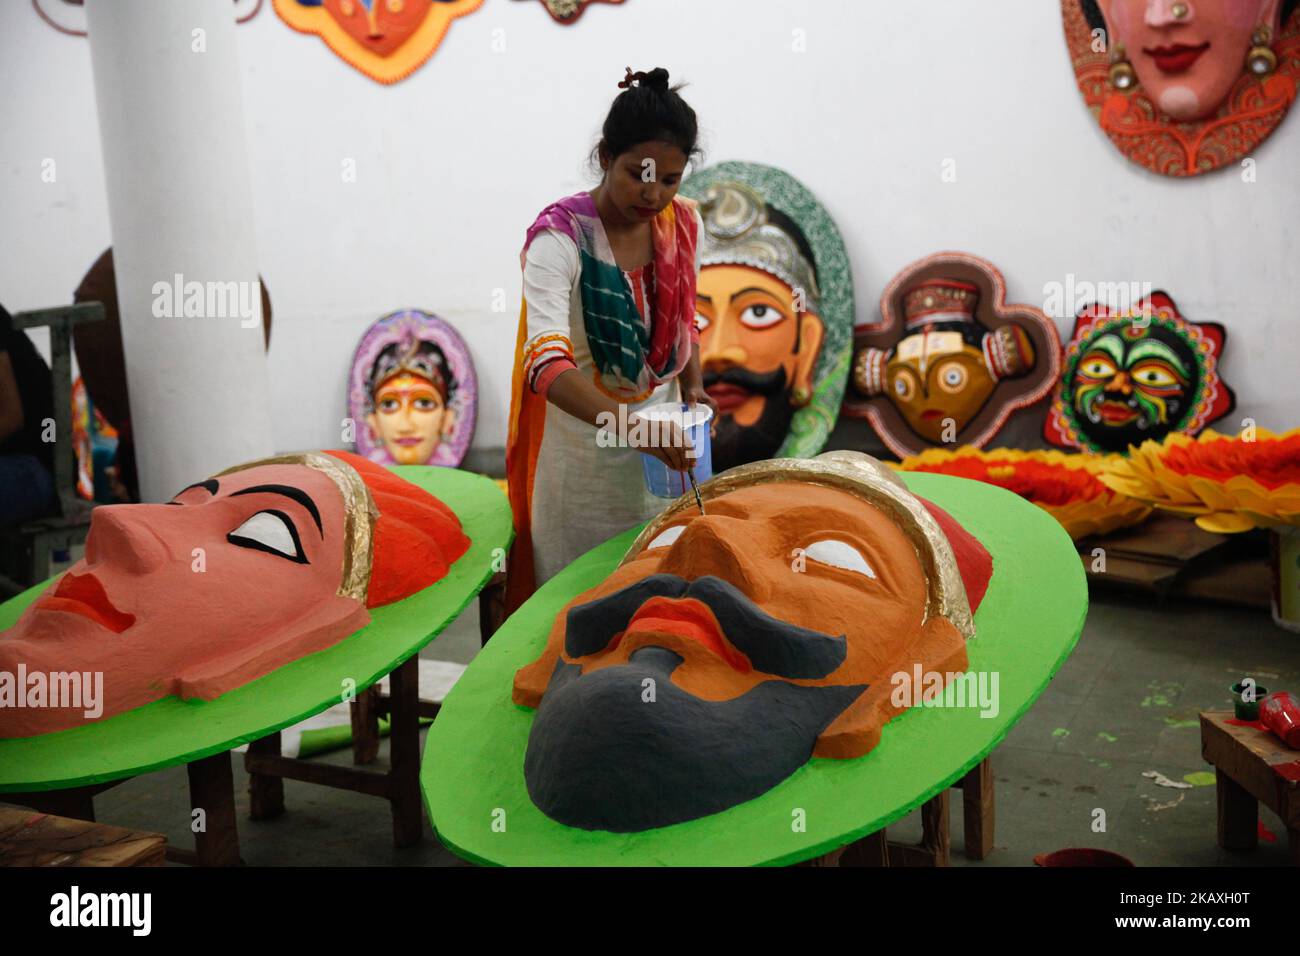 Students of Fine arts of Dhaka University painting masks for colorful preparation to celebrate upcoming Bengali New Year 1425 in Dhaka, Bangladesh 12 April 2018. The day will be celebrated on 14 April while the UNESCO added the Mangal Shobhajatra festival on Pahela Baishakh among other new items to the safeguarding intangible cultural heritage list. (Photo by Mehedi Hasan/NurPhoto) Stock Photo